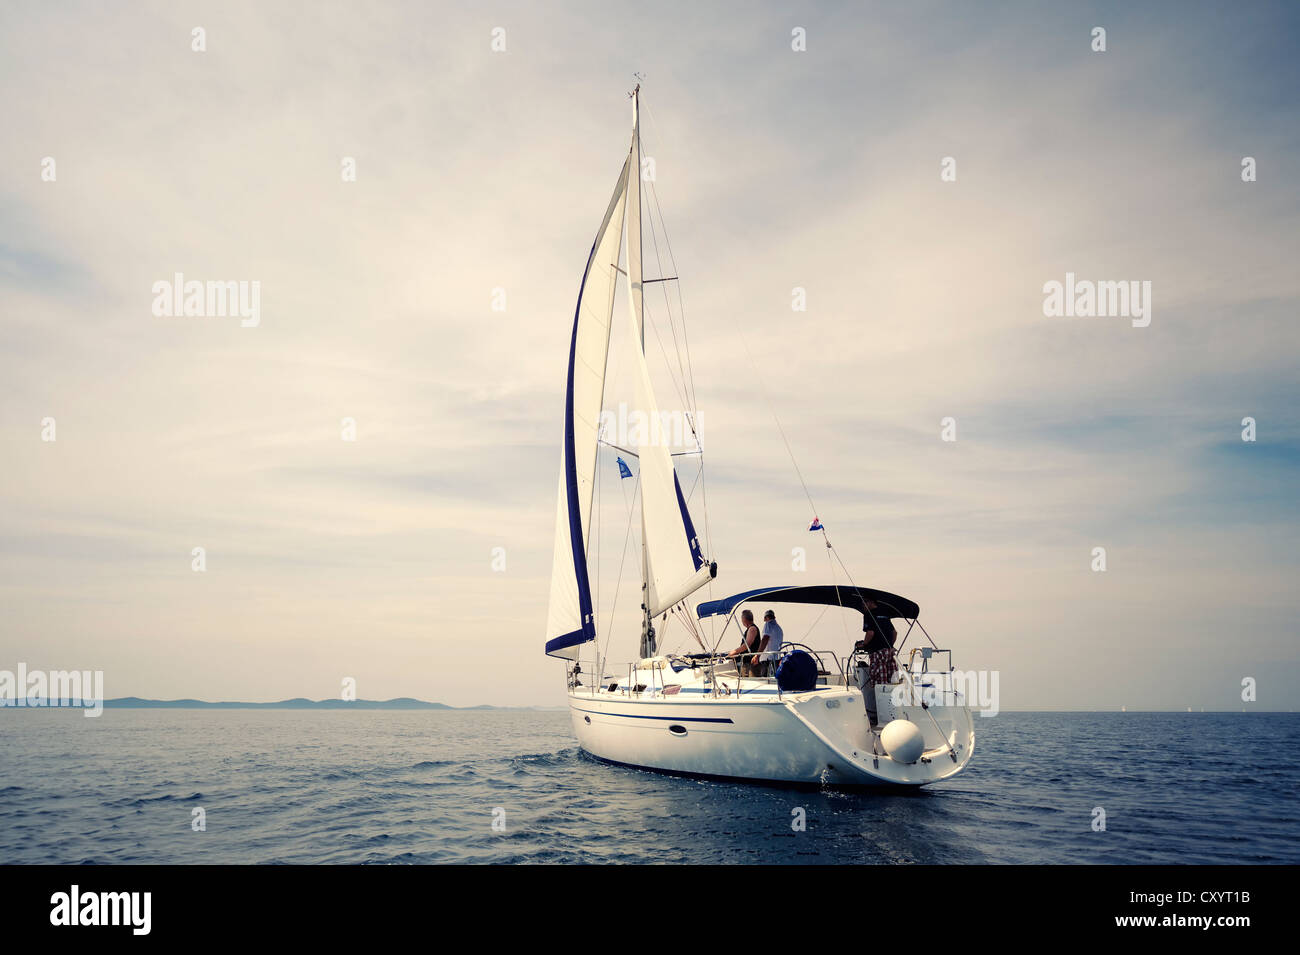 Rear view of a sailing yacht on the sea, no wind Stock Photo